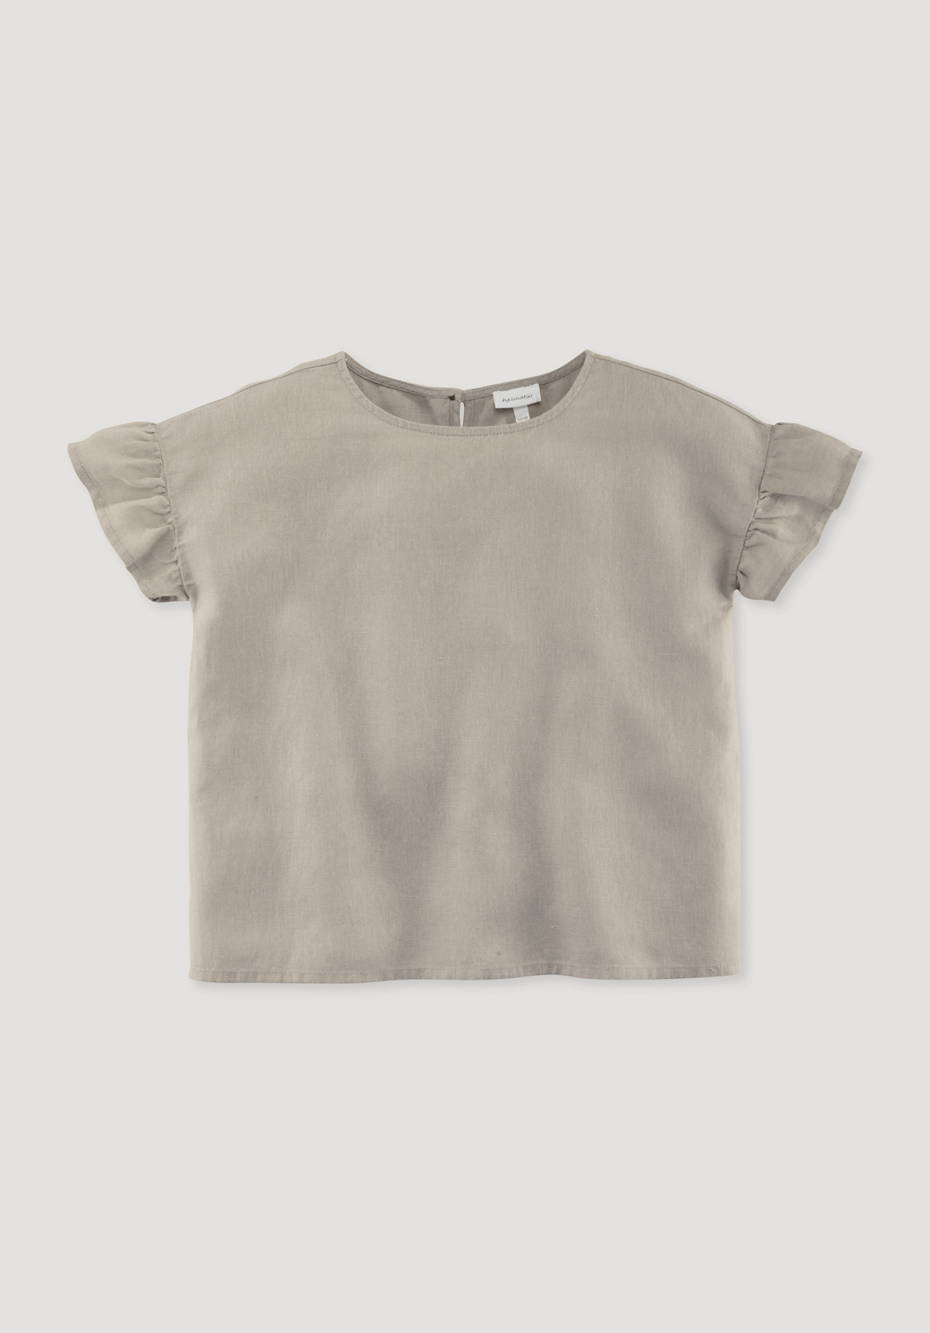 Blouse shirt made of linen with organic cotton